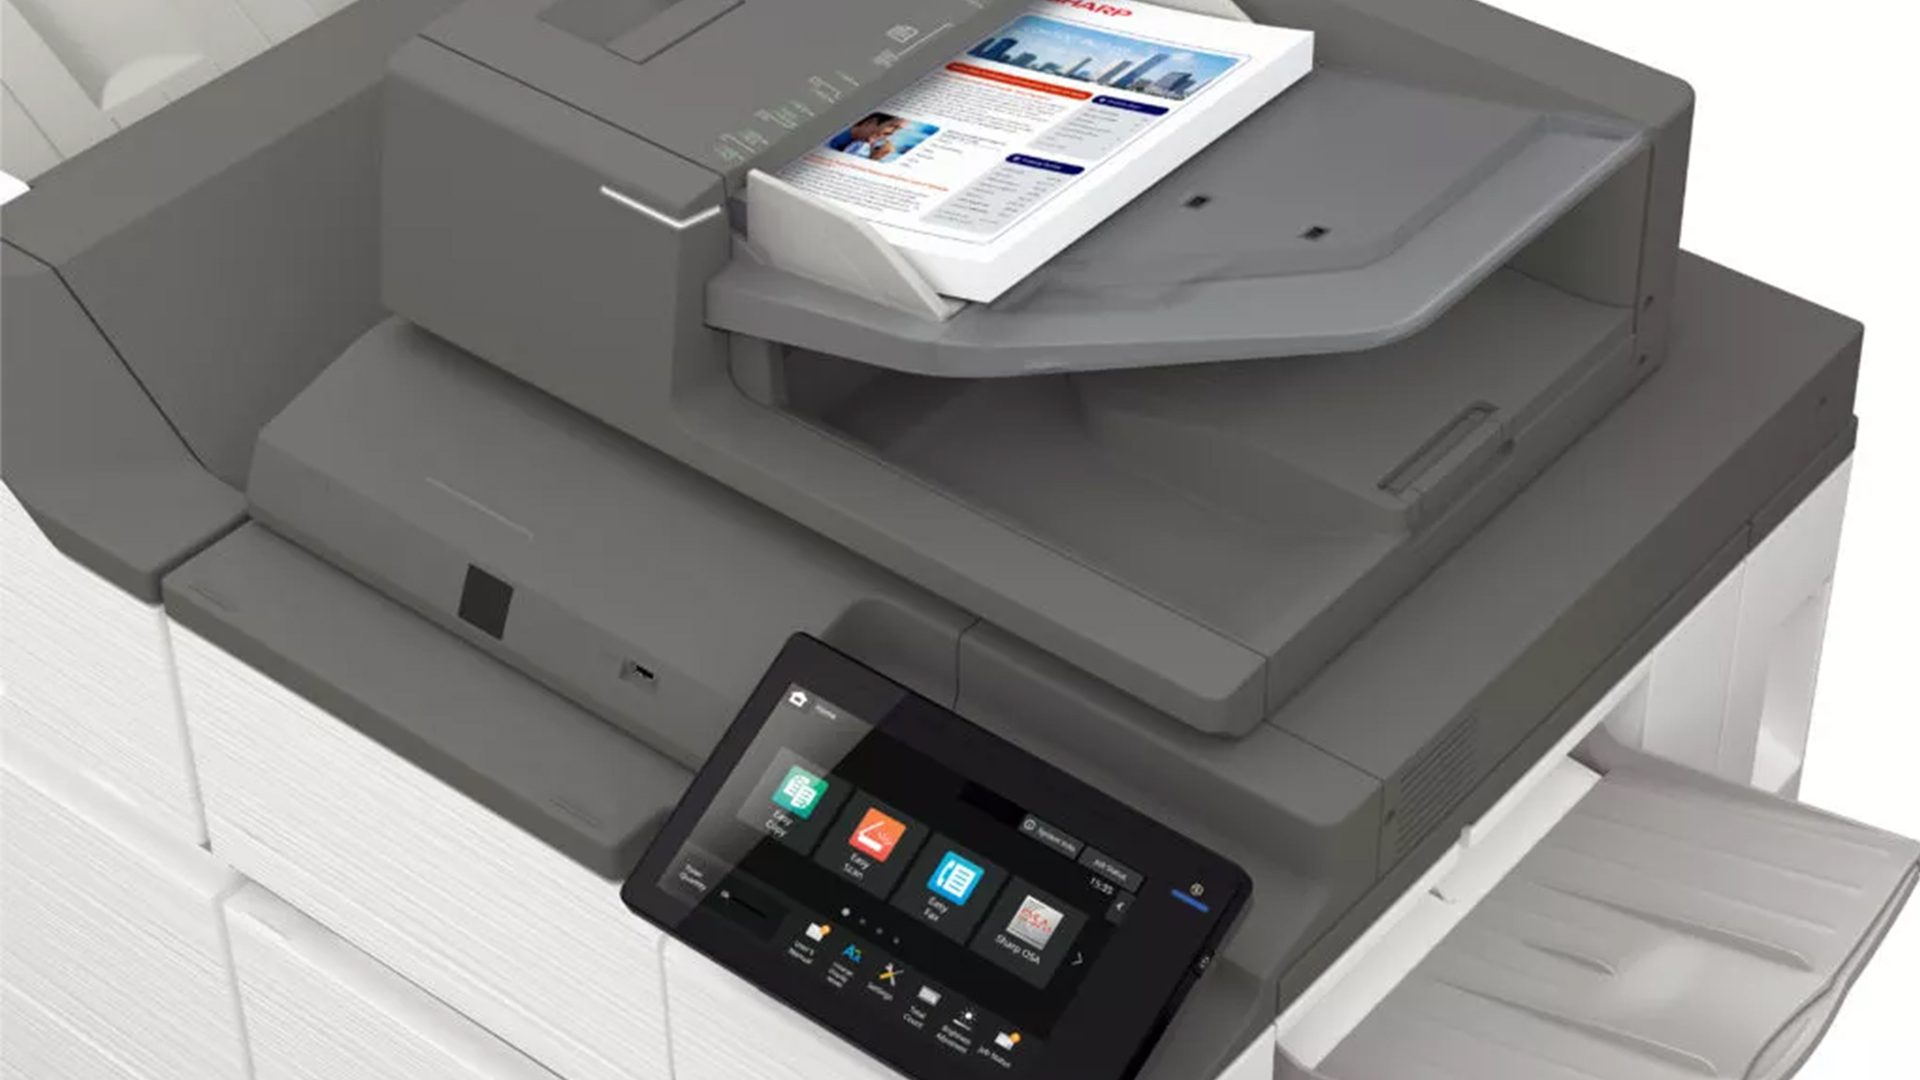 Trin blast biograf The Centric Business Systems Blog - Latest News On Printers & Copiers